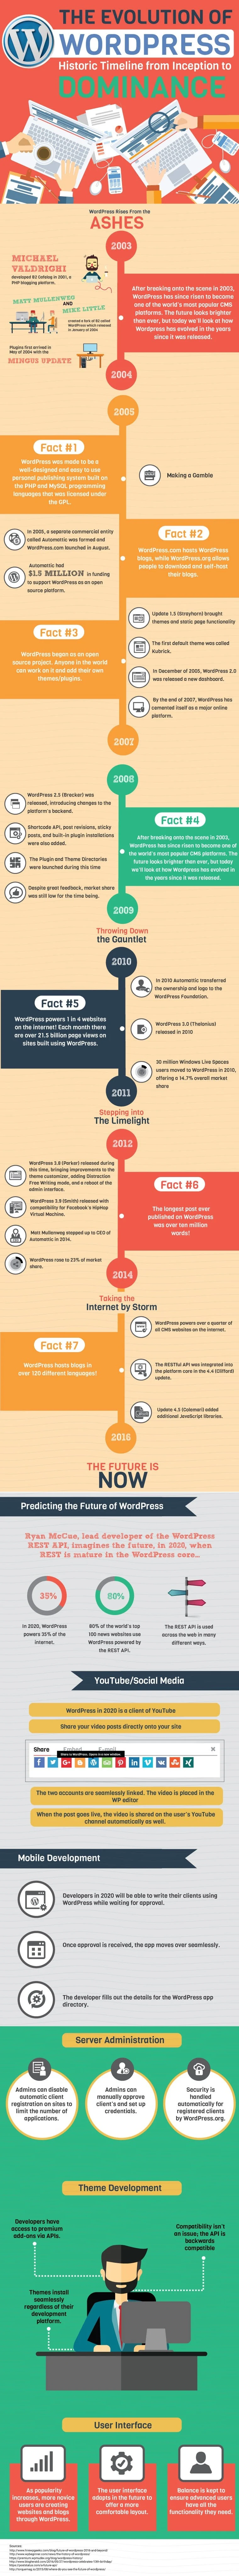 A Timeline of WordPress - #infographic 